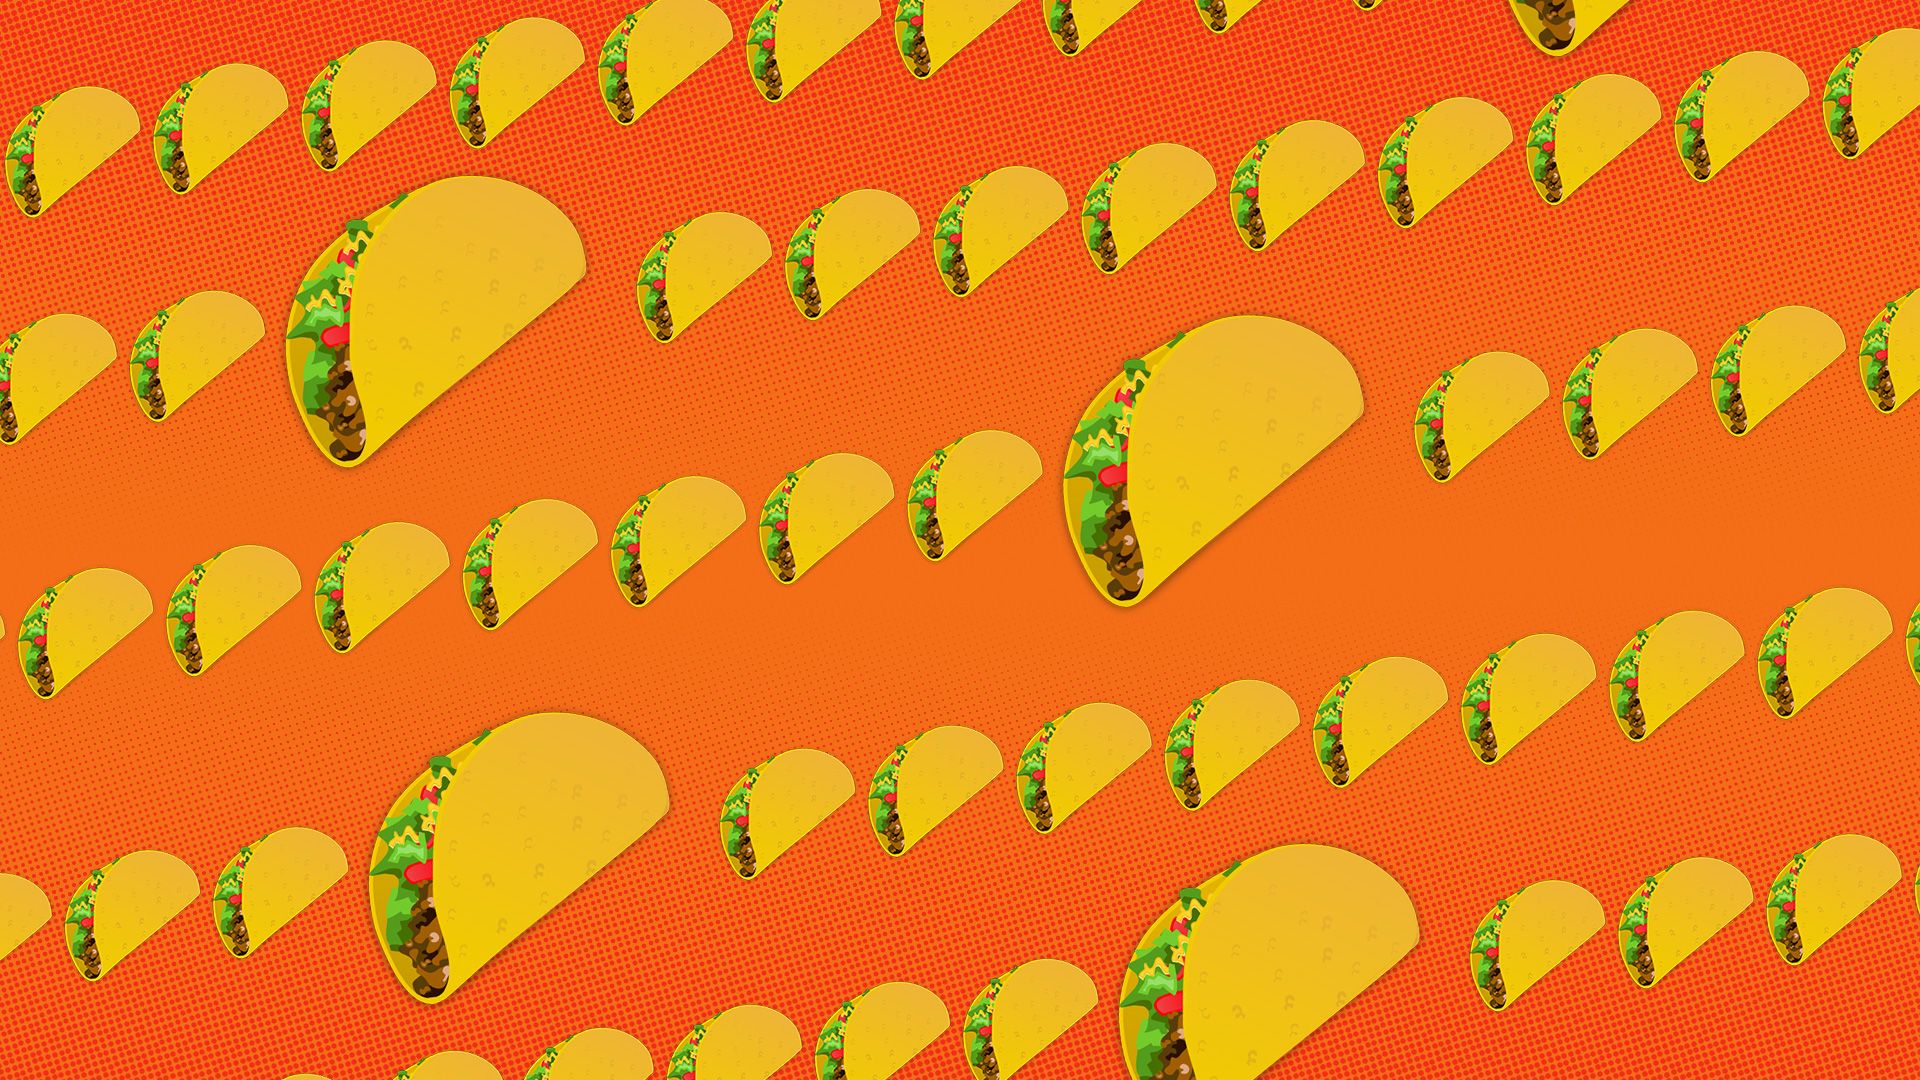 Taco Wallpaper. Festive Taco Wallpaper, Taco Wallpaper and Taco Bell Chihuahua Wallpaper